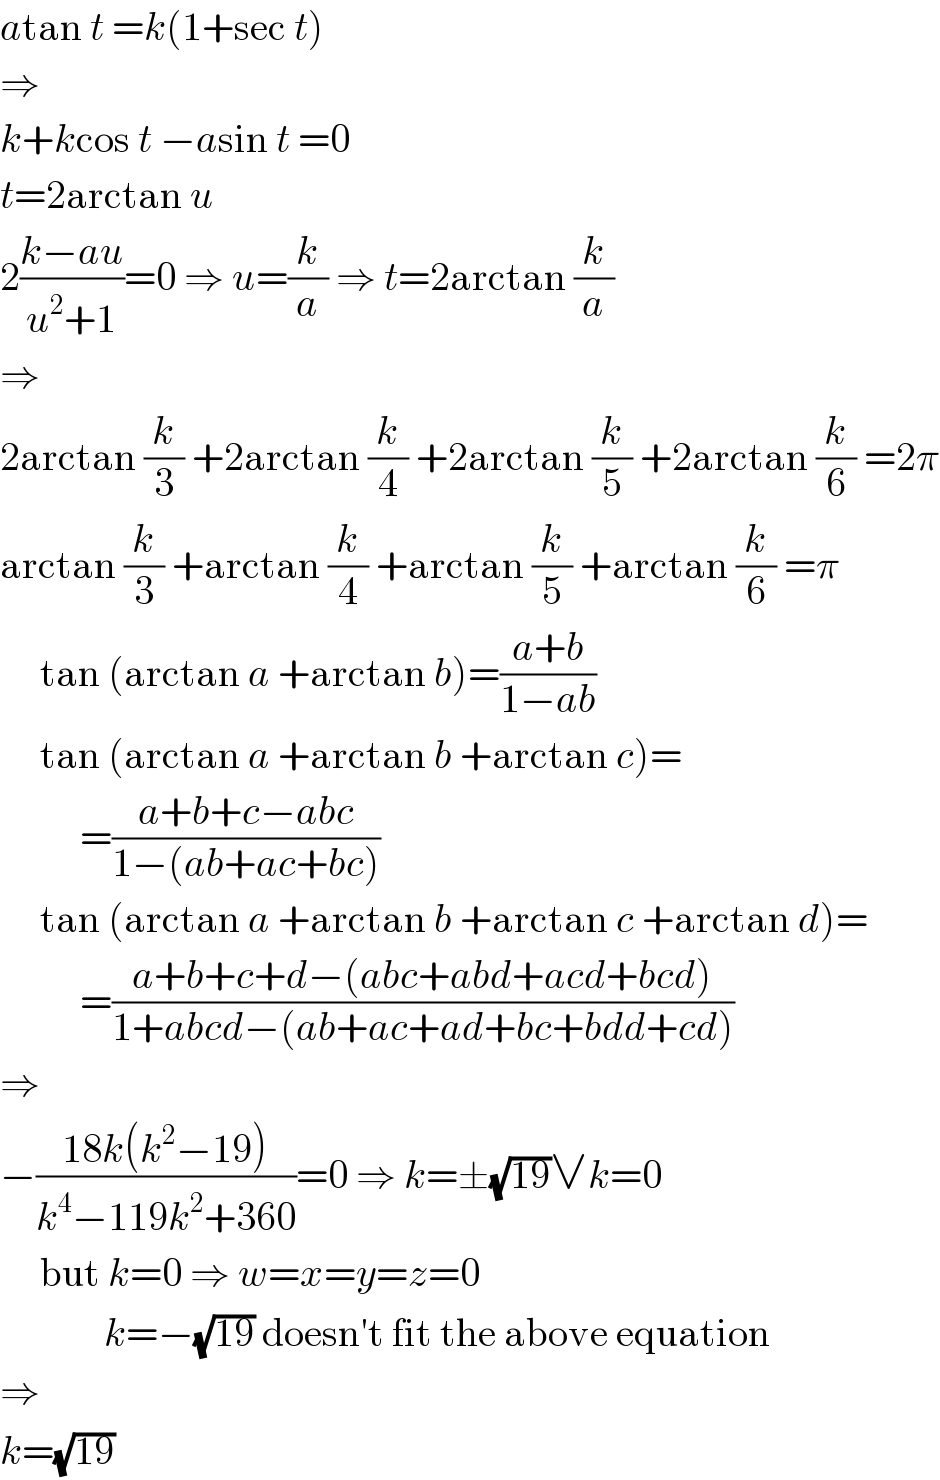 atan t =k(1+sec t)  ⇒  k+kcos t −asin t =0  t=2arctan u  2((k−au)/(u^2 +1))=0 ⇒ u=(k/a) ⇒ t=2arctan (k/a)  ⇒  2arctan (k/3) +2arctan (k/4) +2arctan (k/5) +2arctan (k/6) =2π  arctan (k/3) +arctan (k/4) +arctan (k/5) +arctan (k/6) =π       tan (arctan a +arctan b)=((a+b)/(1−ab))       tan (arctan a +arctan b +arctan c)=            =((a+b+c−abc)/(1−(ab+ac+bc)))       tan (arctan a +arctan b +arctan c +arctan d)=            =((a+b+c+d−(abc+abd+acd+bcd))/(1+abcd−(ab+ac+ad+bc+bdd+cd)))  ⇒  −((18k(k^2 −19))/(k^4 −119k^2 +360))=0 ⇒ k=±(√(19))∨k=0       but k=0 ⇒ w=x=y=z=0               k=−(√(19)) doesn′t fit the above equation  ⇒  k=(√(19))  